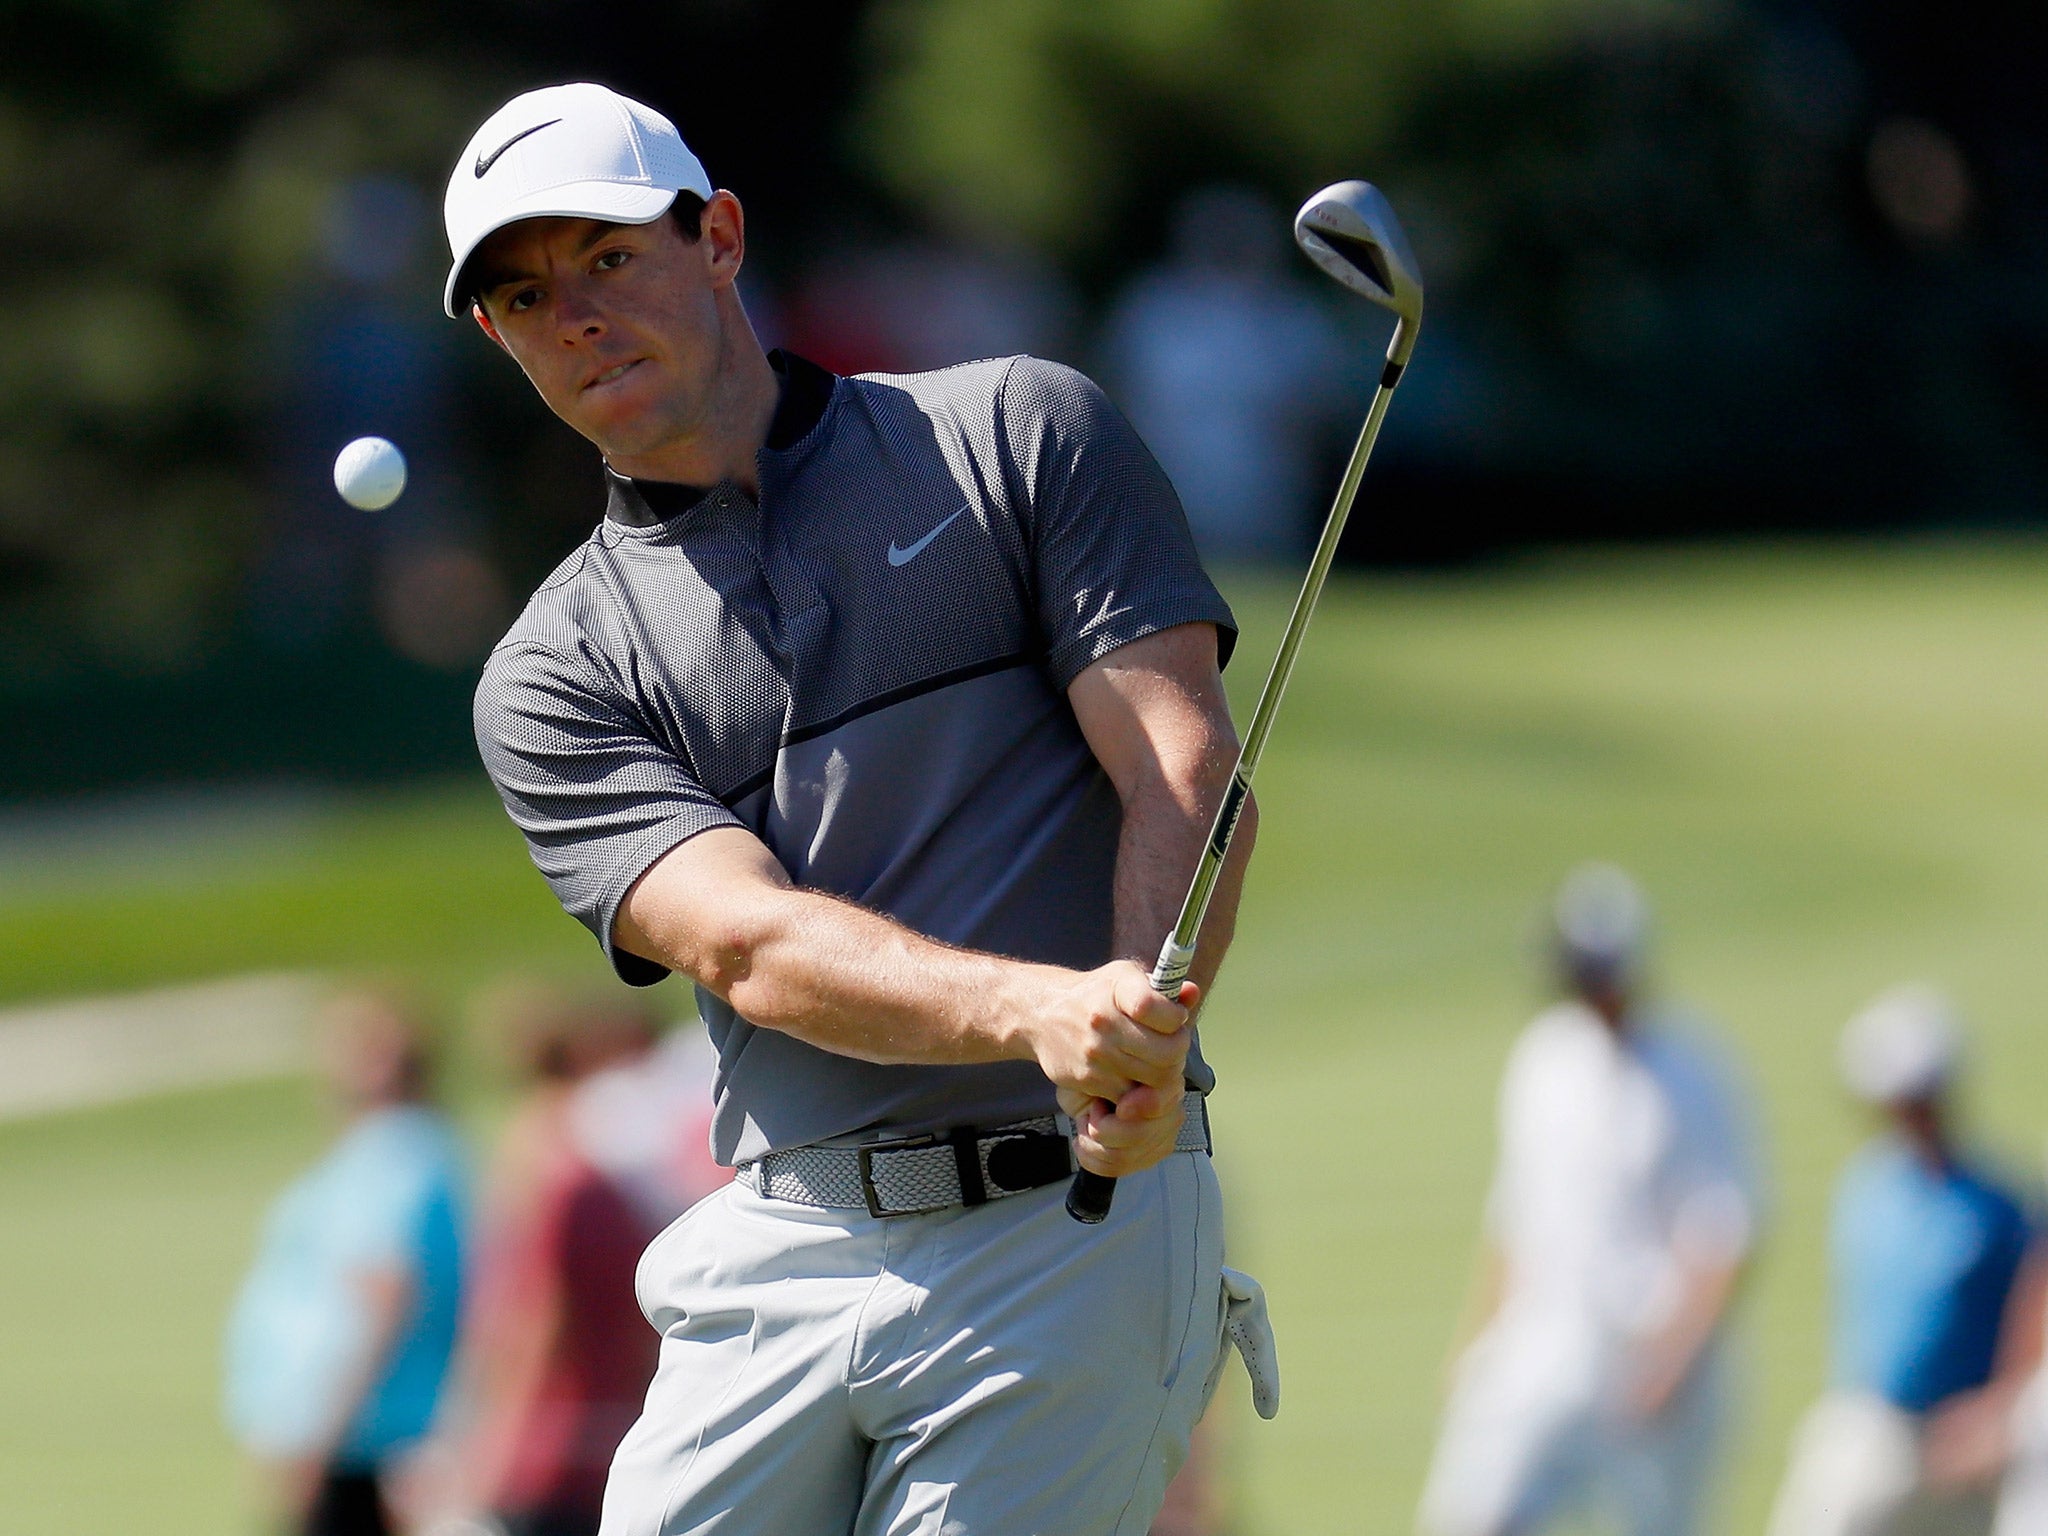 Rory McIlroy starts the 98th US PGA Championship at Baltusrol as the bookmakers' favourite